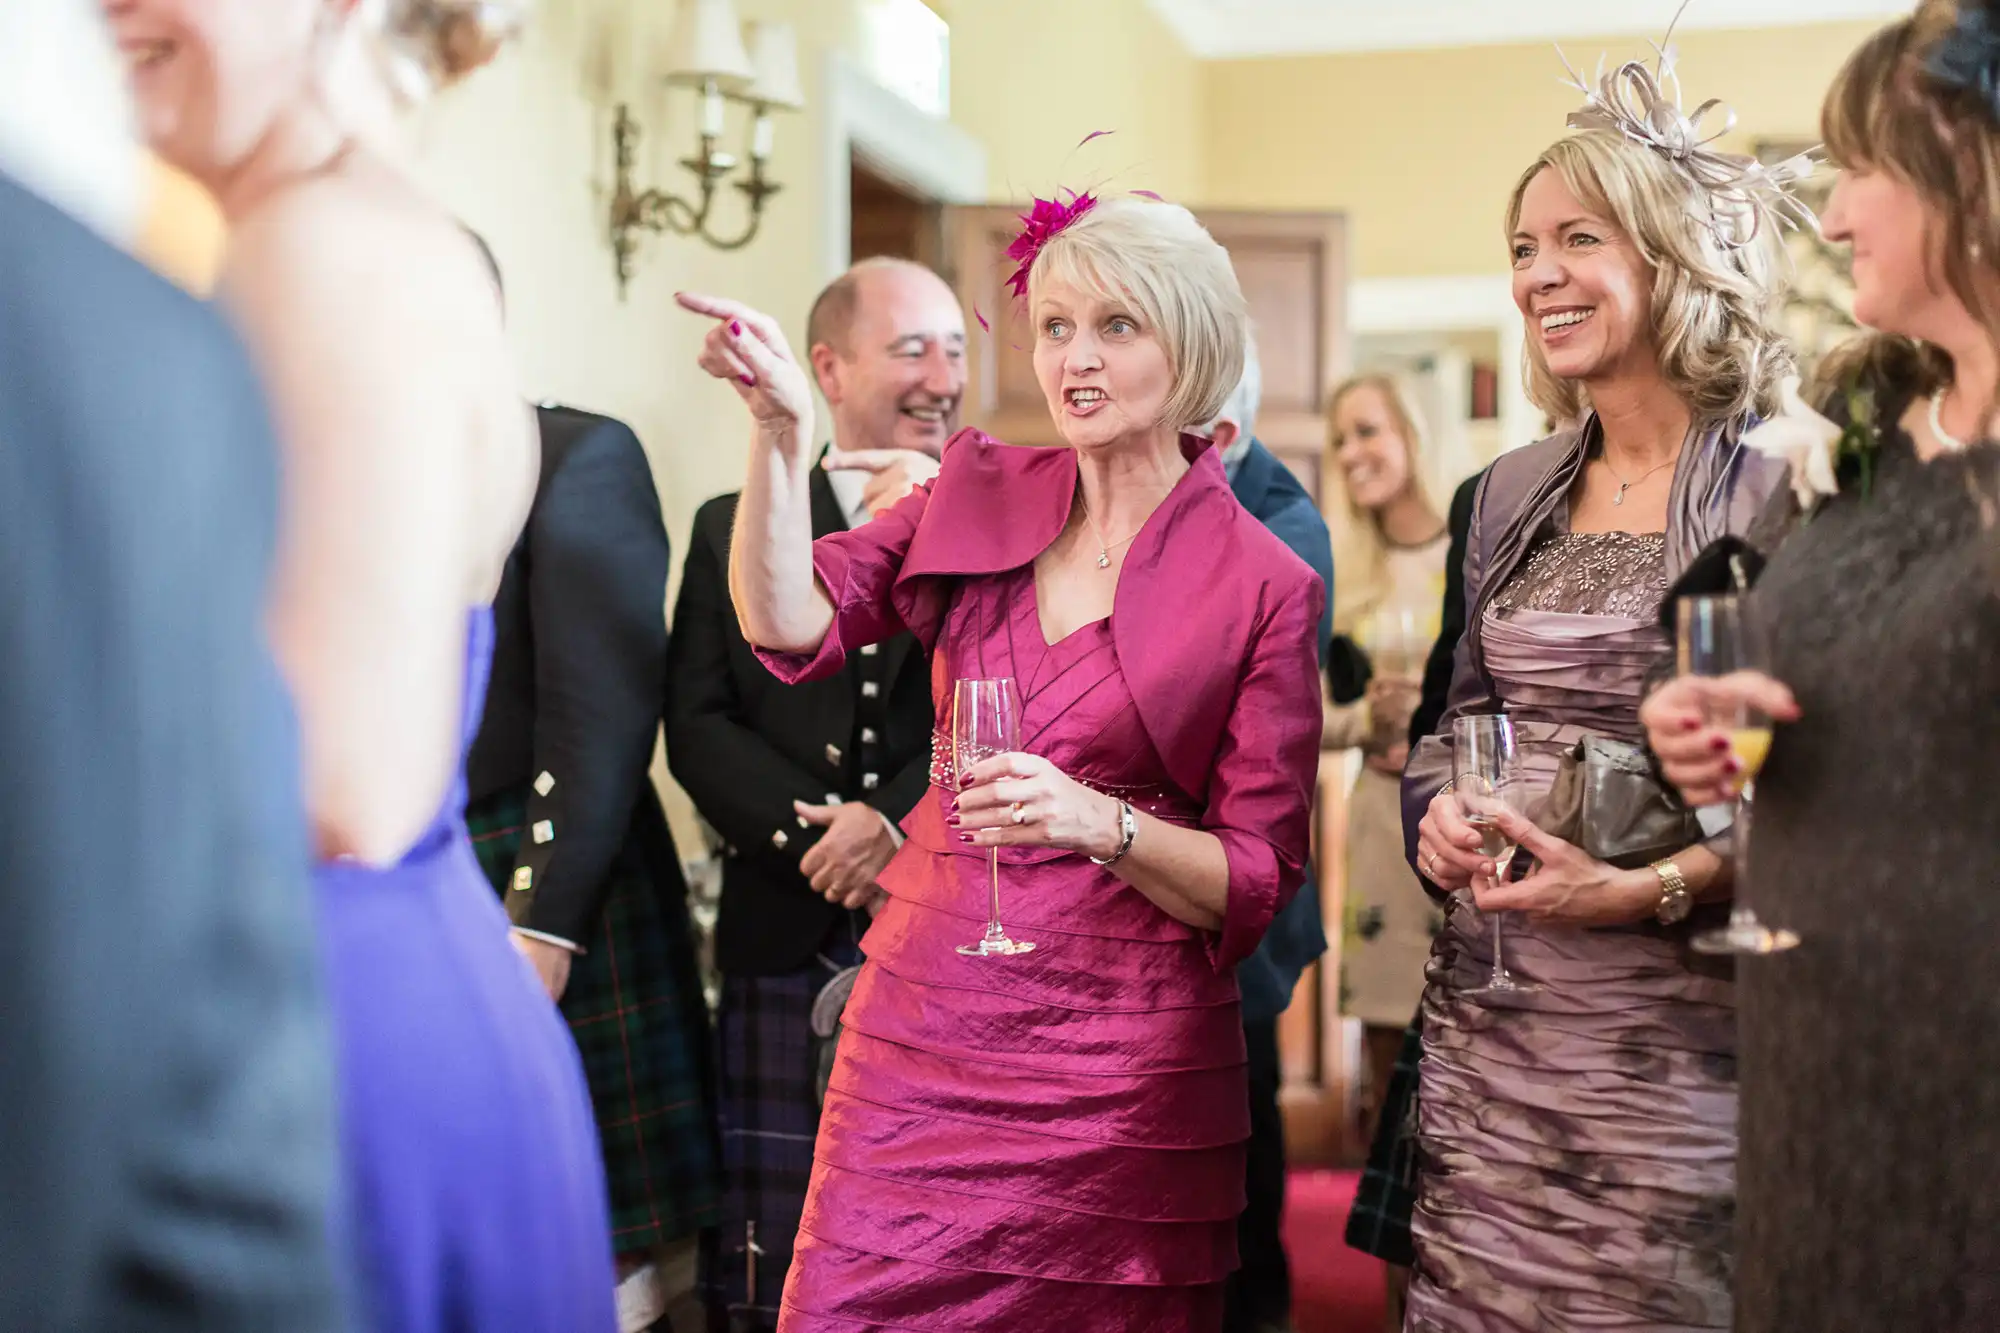 Guests in formal attire enjoying a conversation at a wedding reception, with one woman holding a champagne flute.